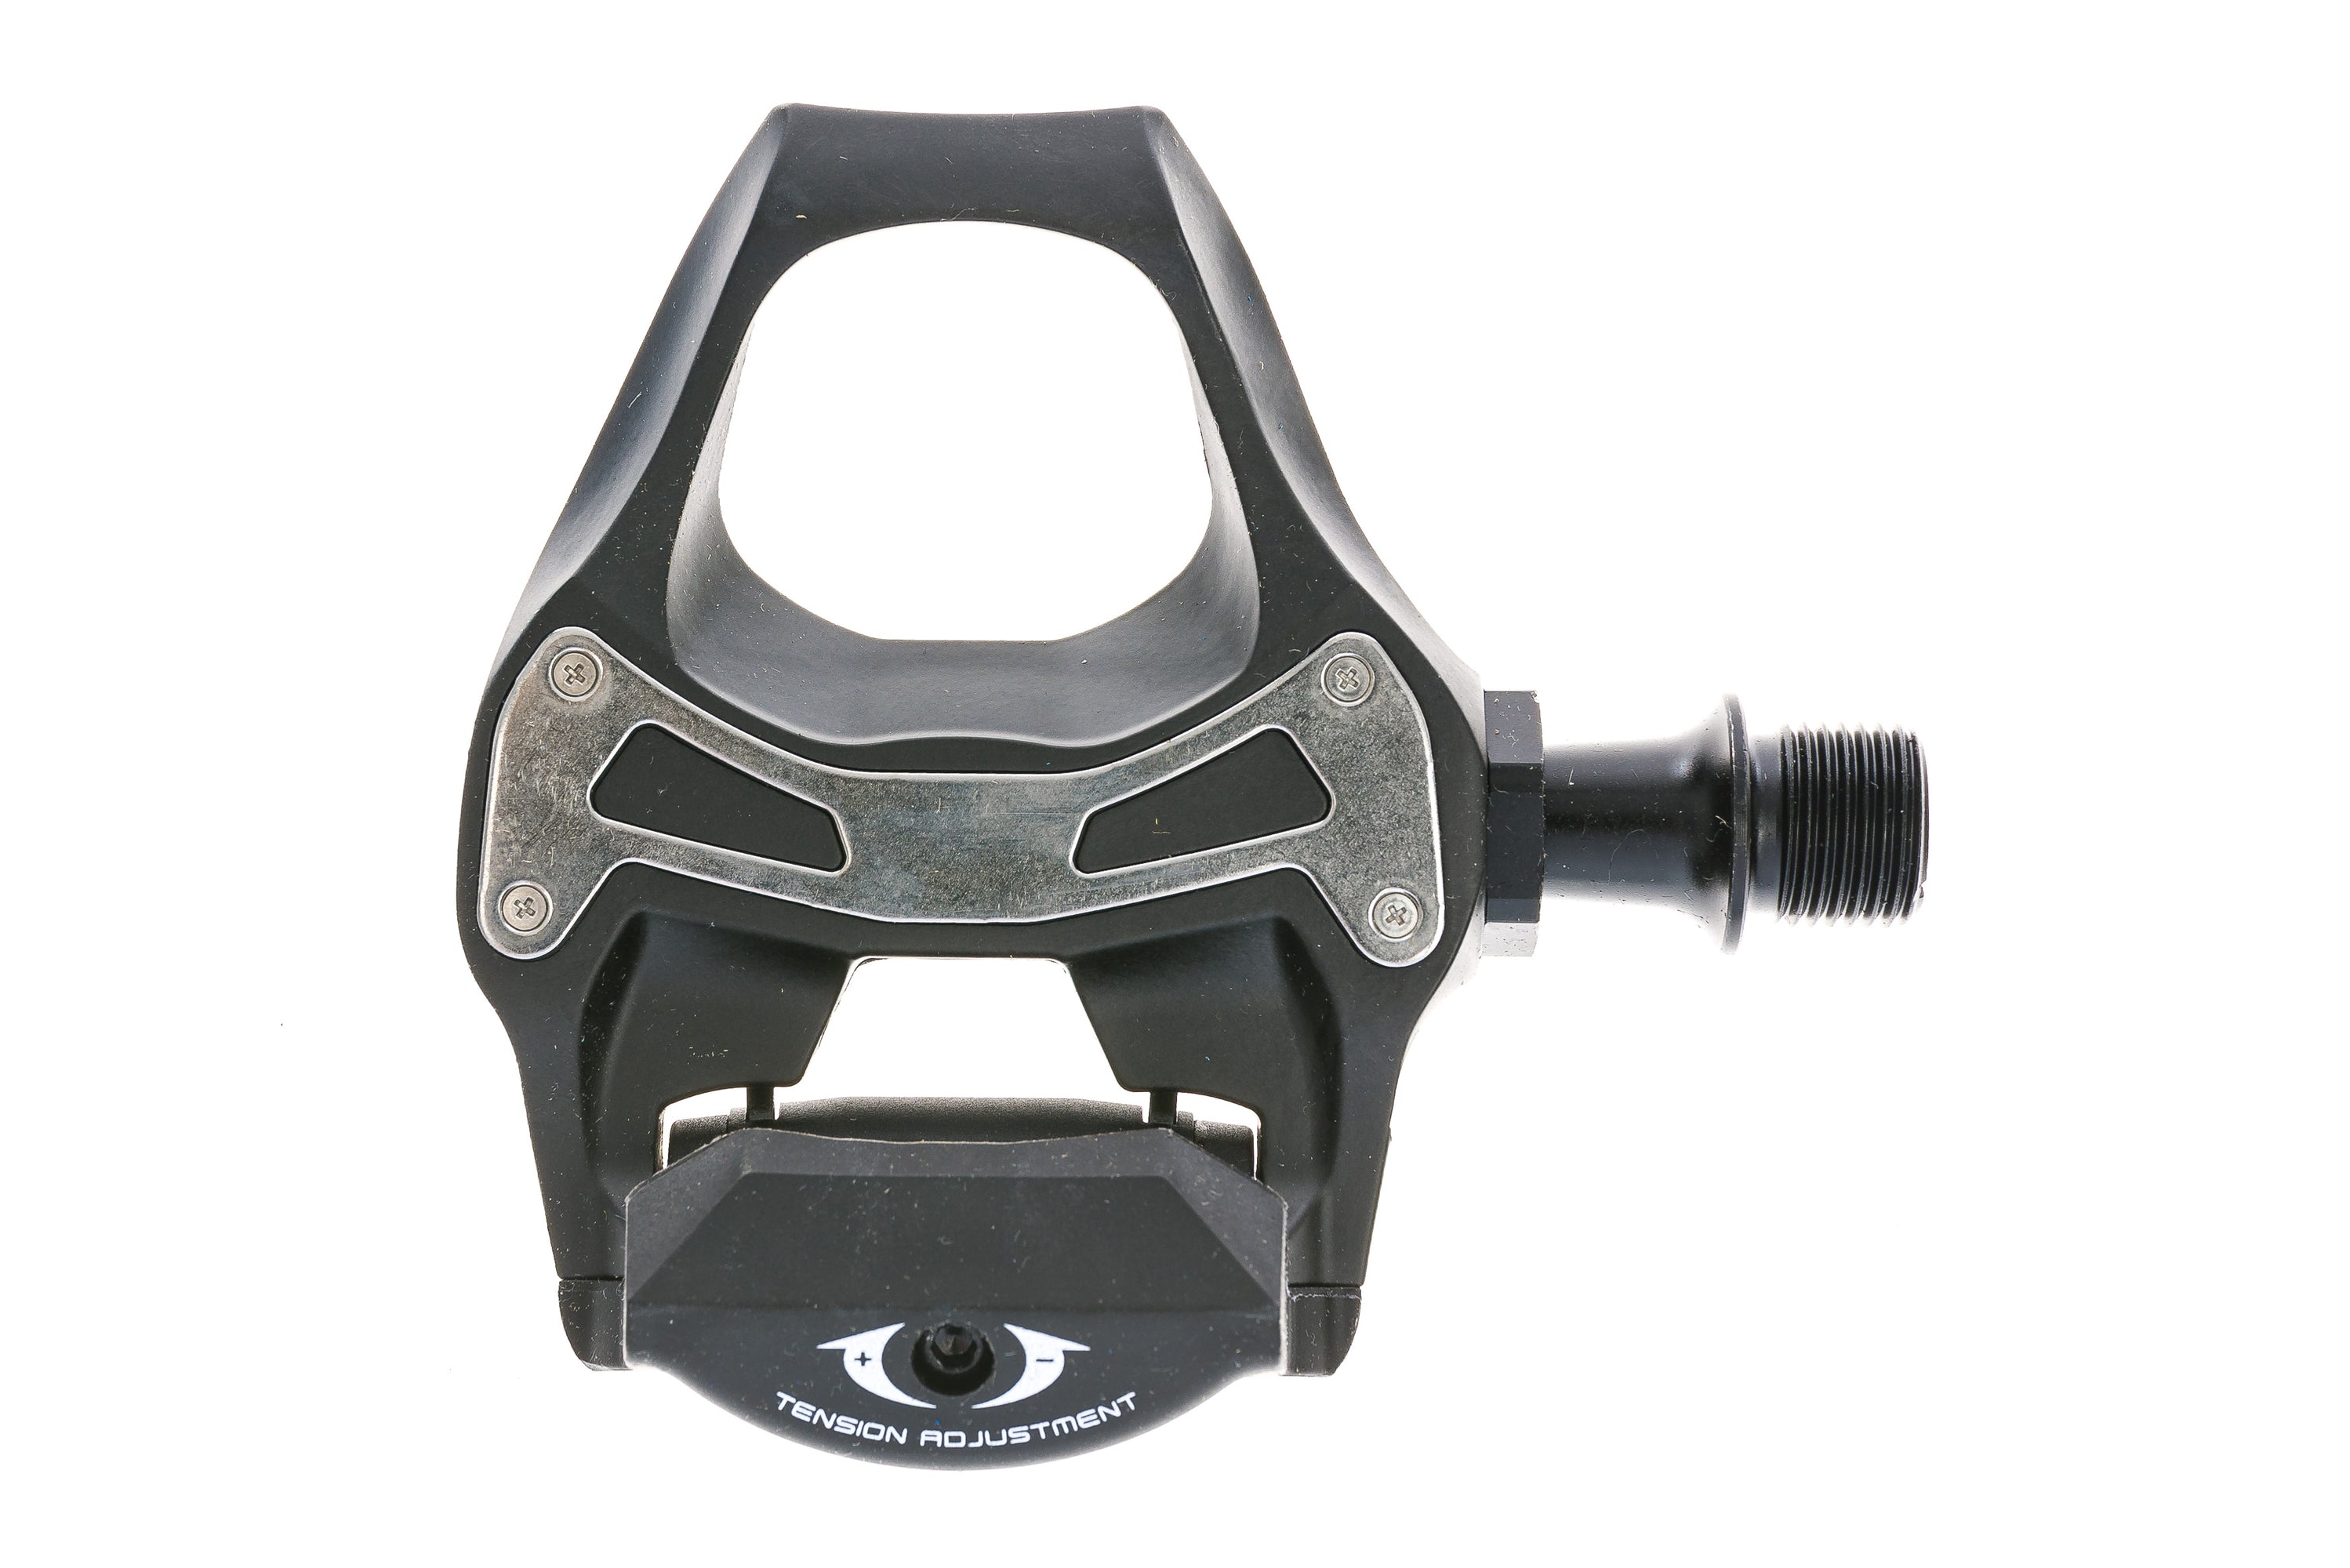 Shimano 105 PD-5800 Pedals Clipless Composite Black - Pre-Owned drive side